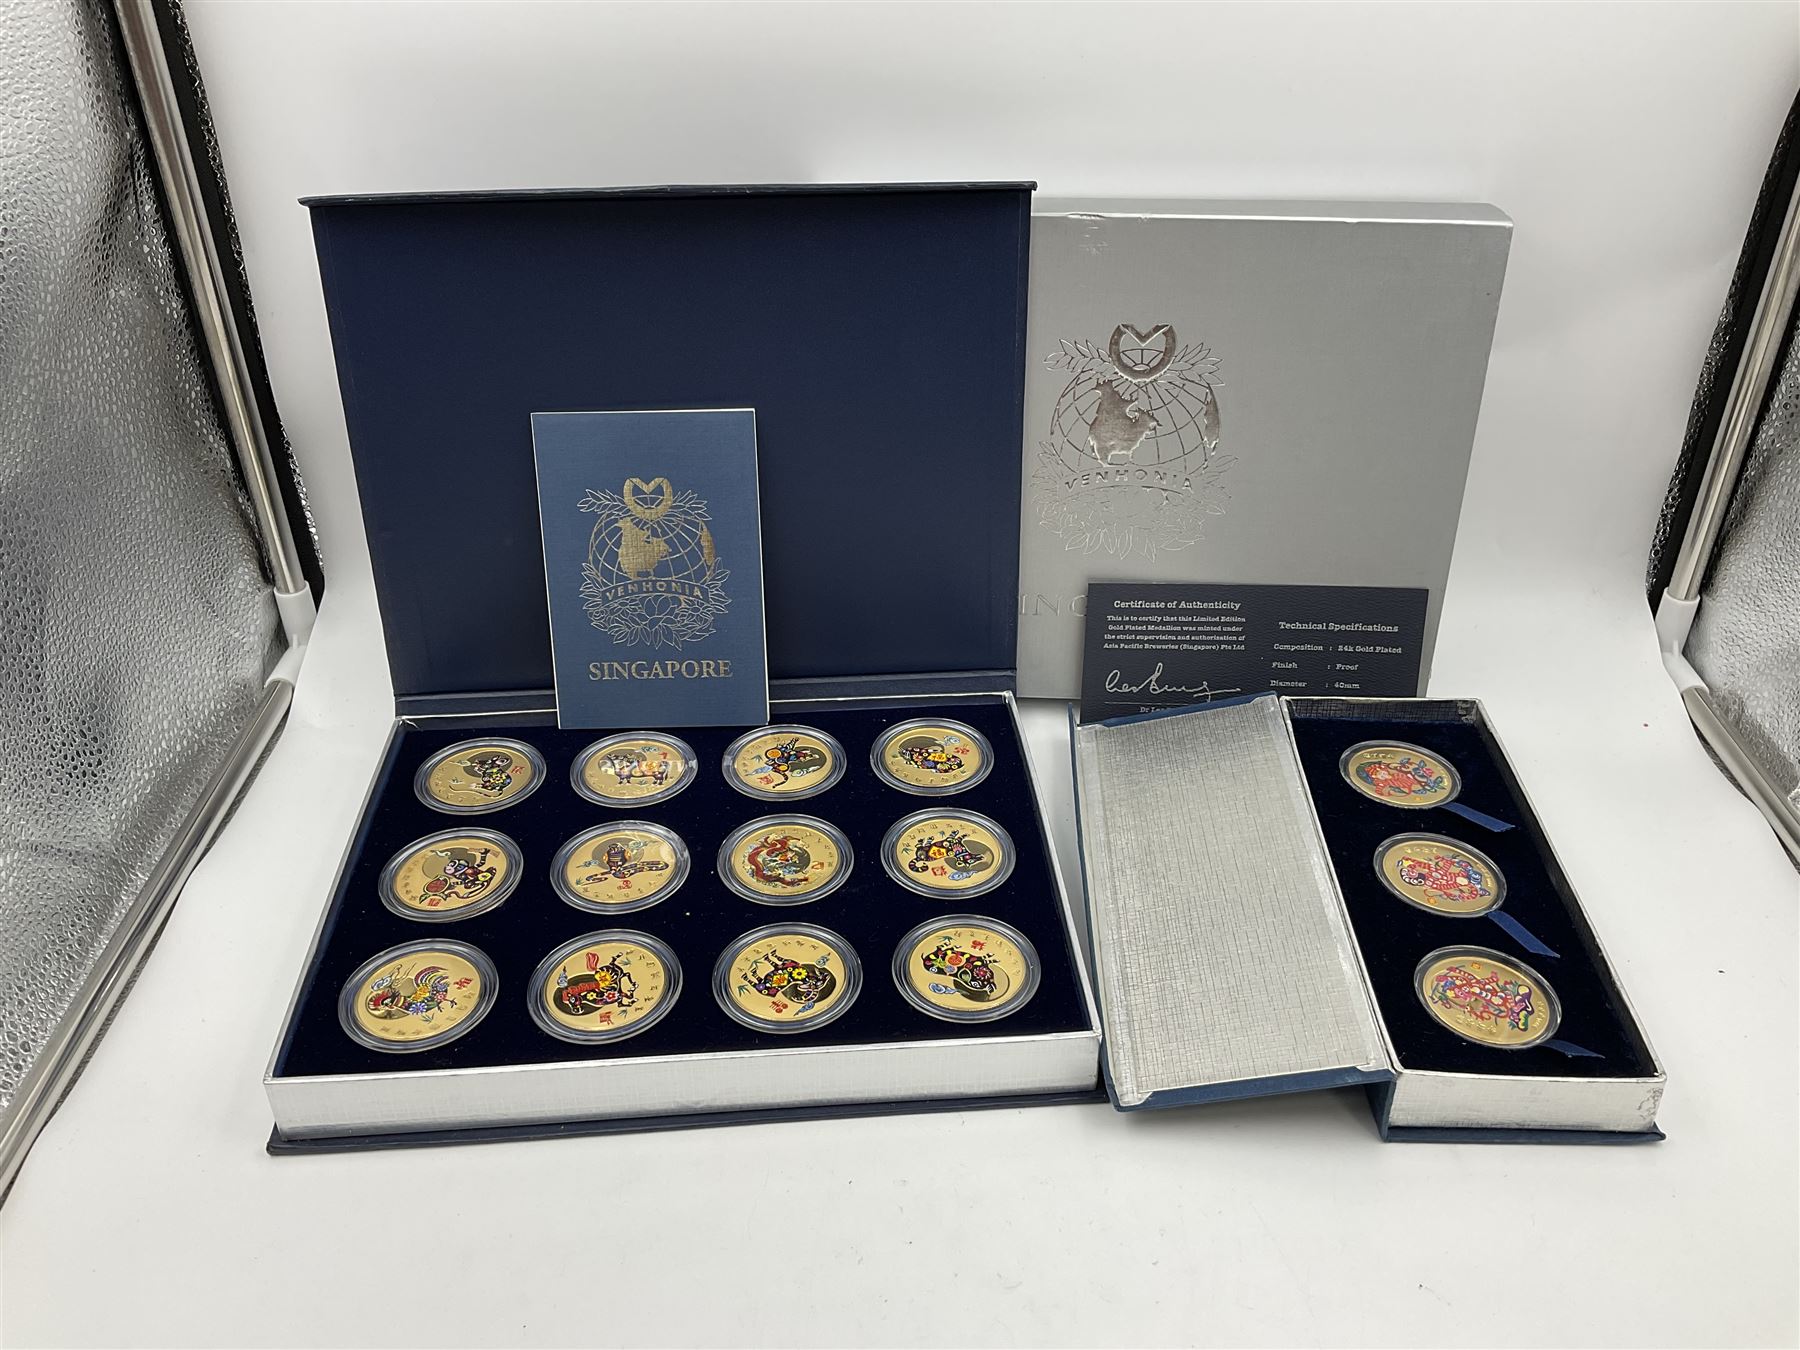 Singapore Venhonia commemorative medallion collection and a Tiger Beer commemorative three-medallion - Image 6 of 6